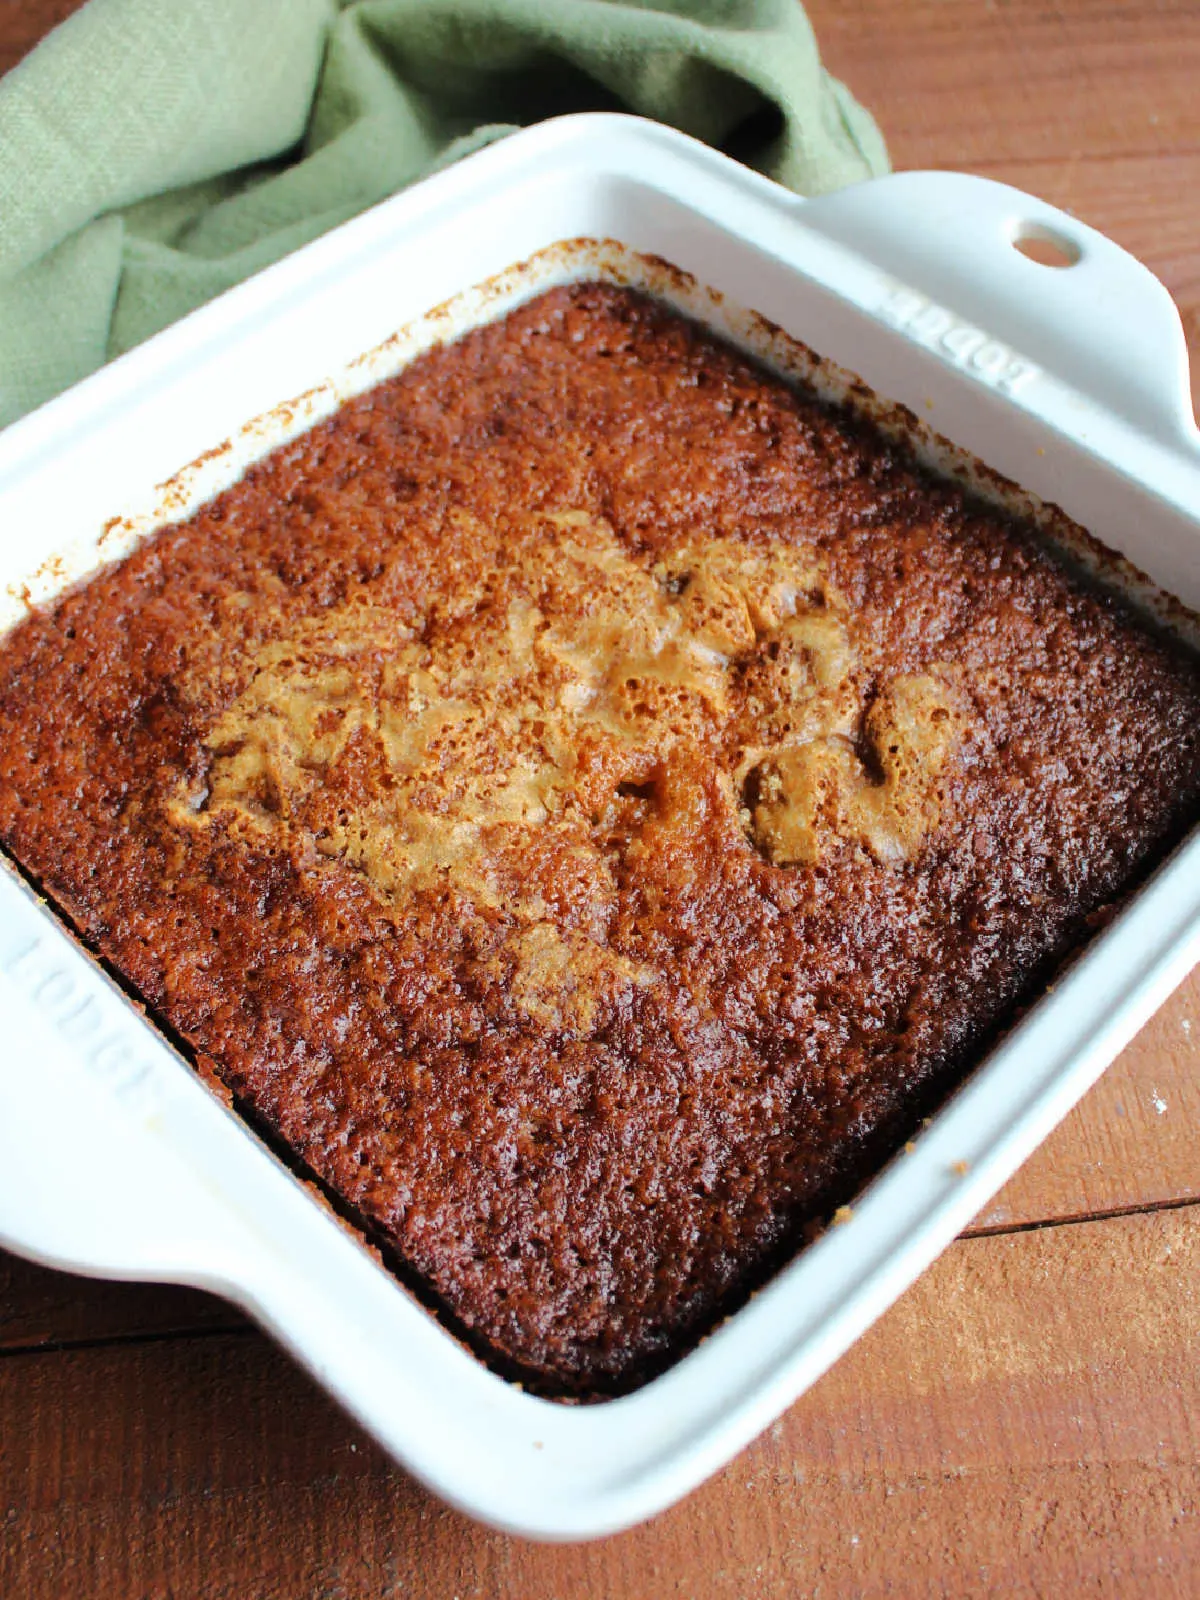 Freshly baked fruit cocktail cake with browned top, ready to serve.